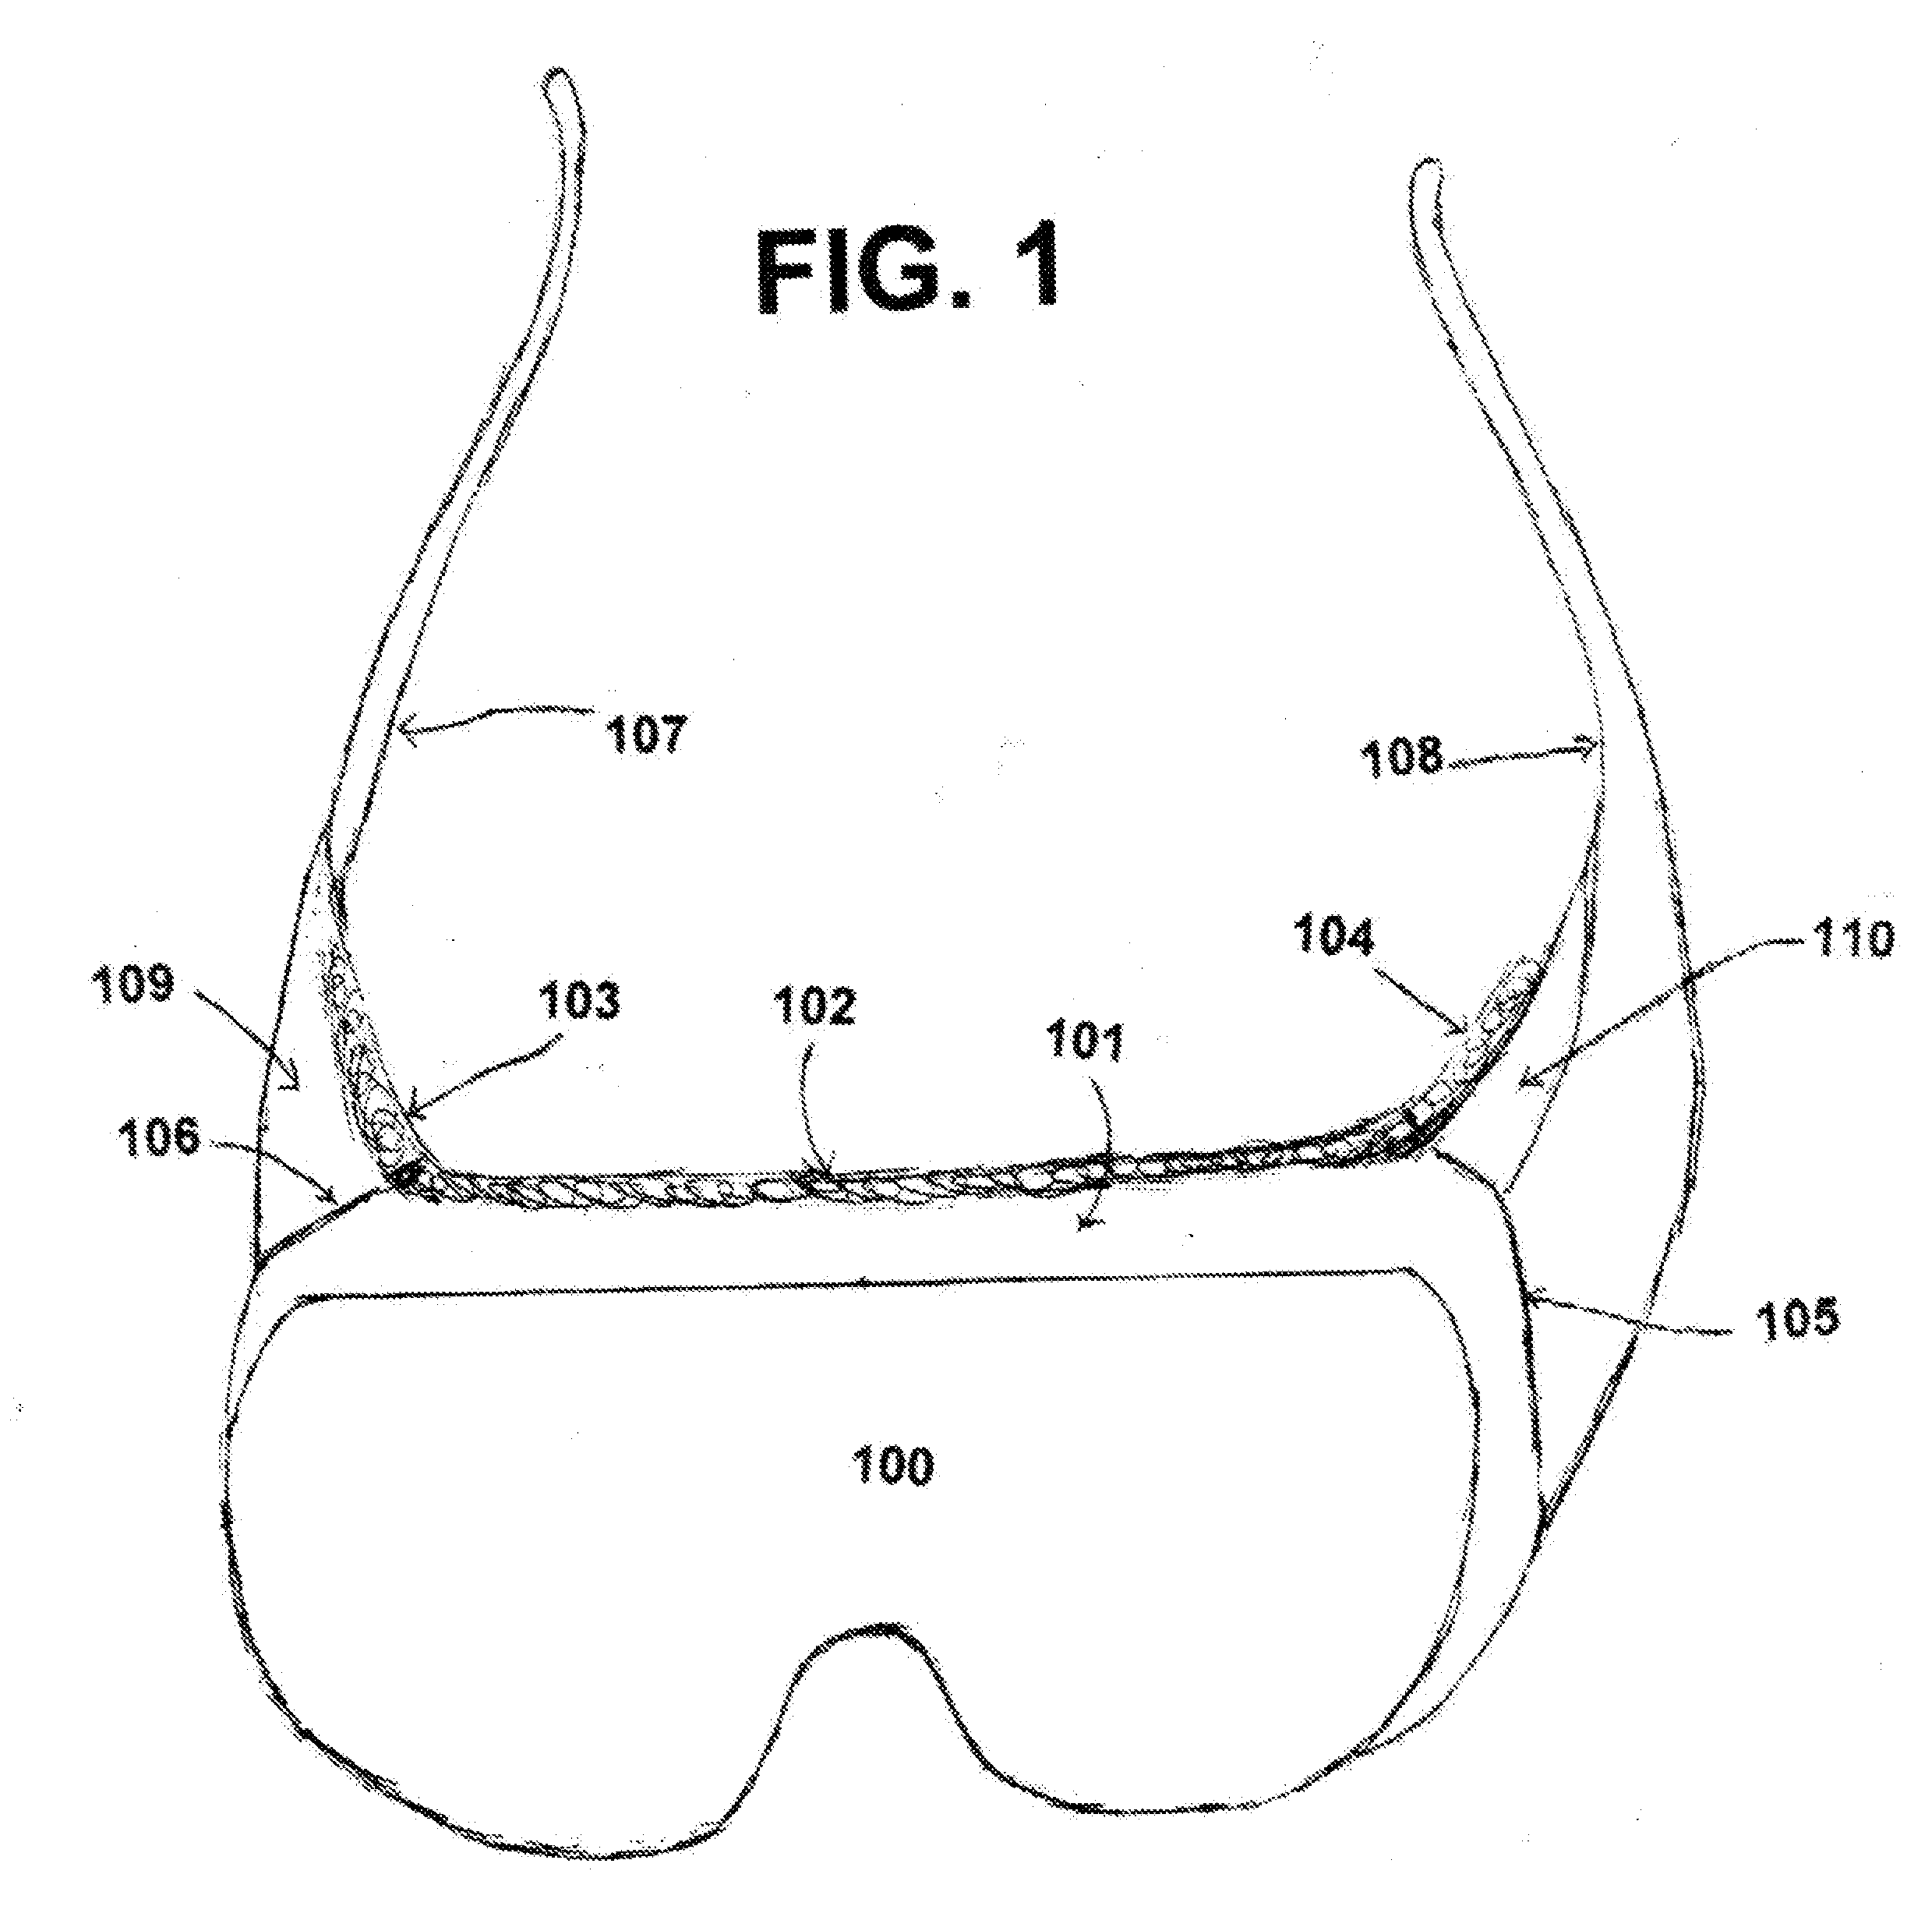 Eyewear for people with low vision or impaired vision